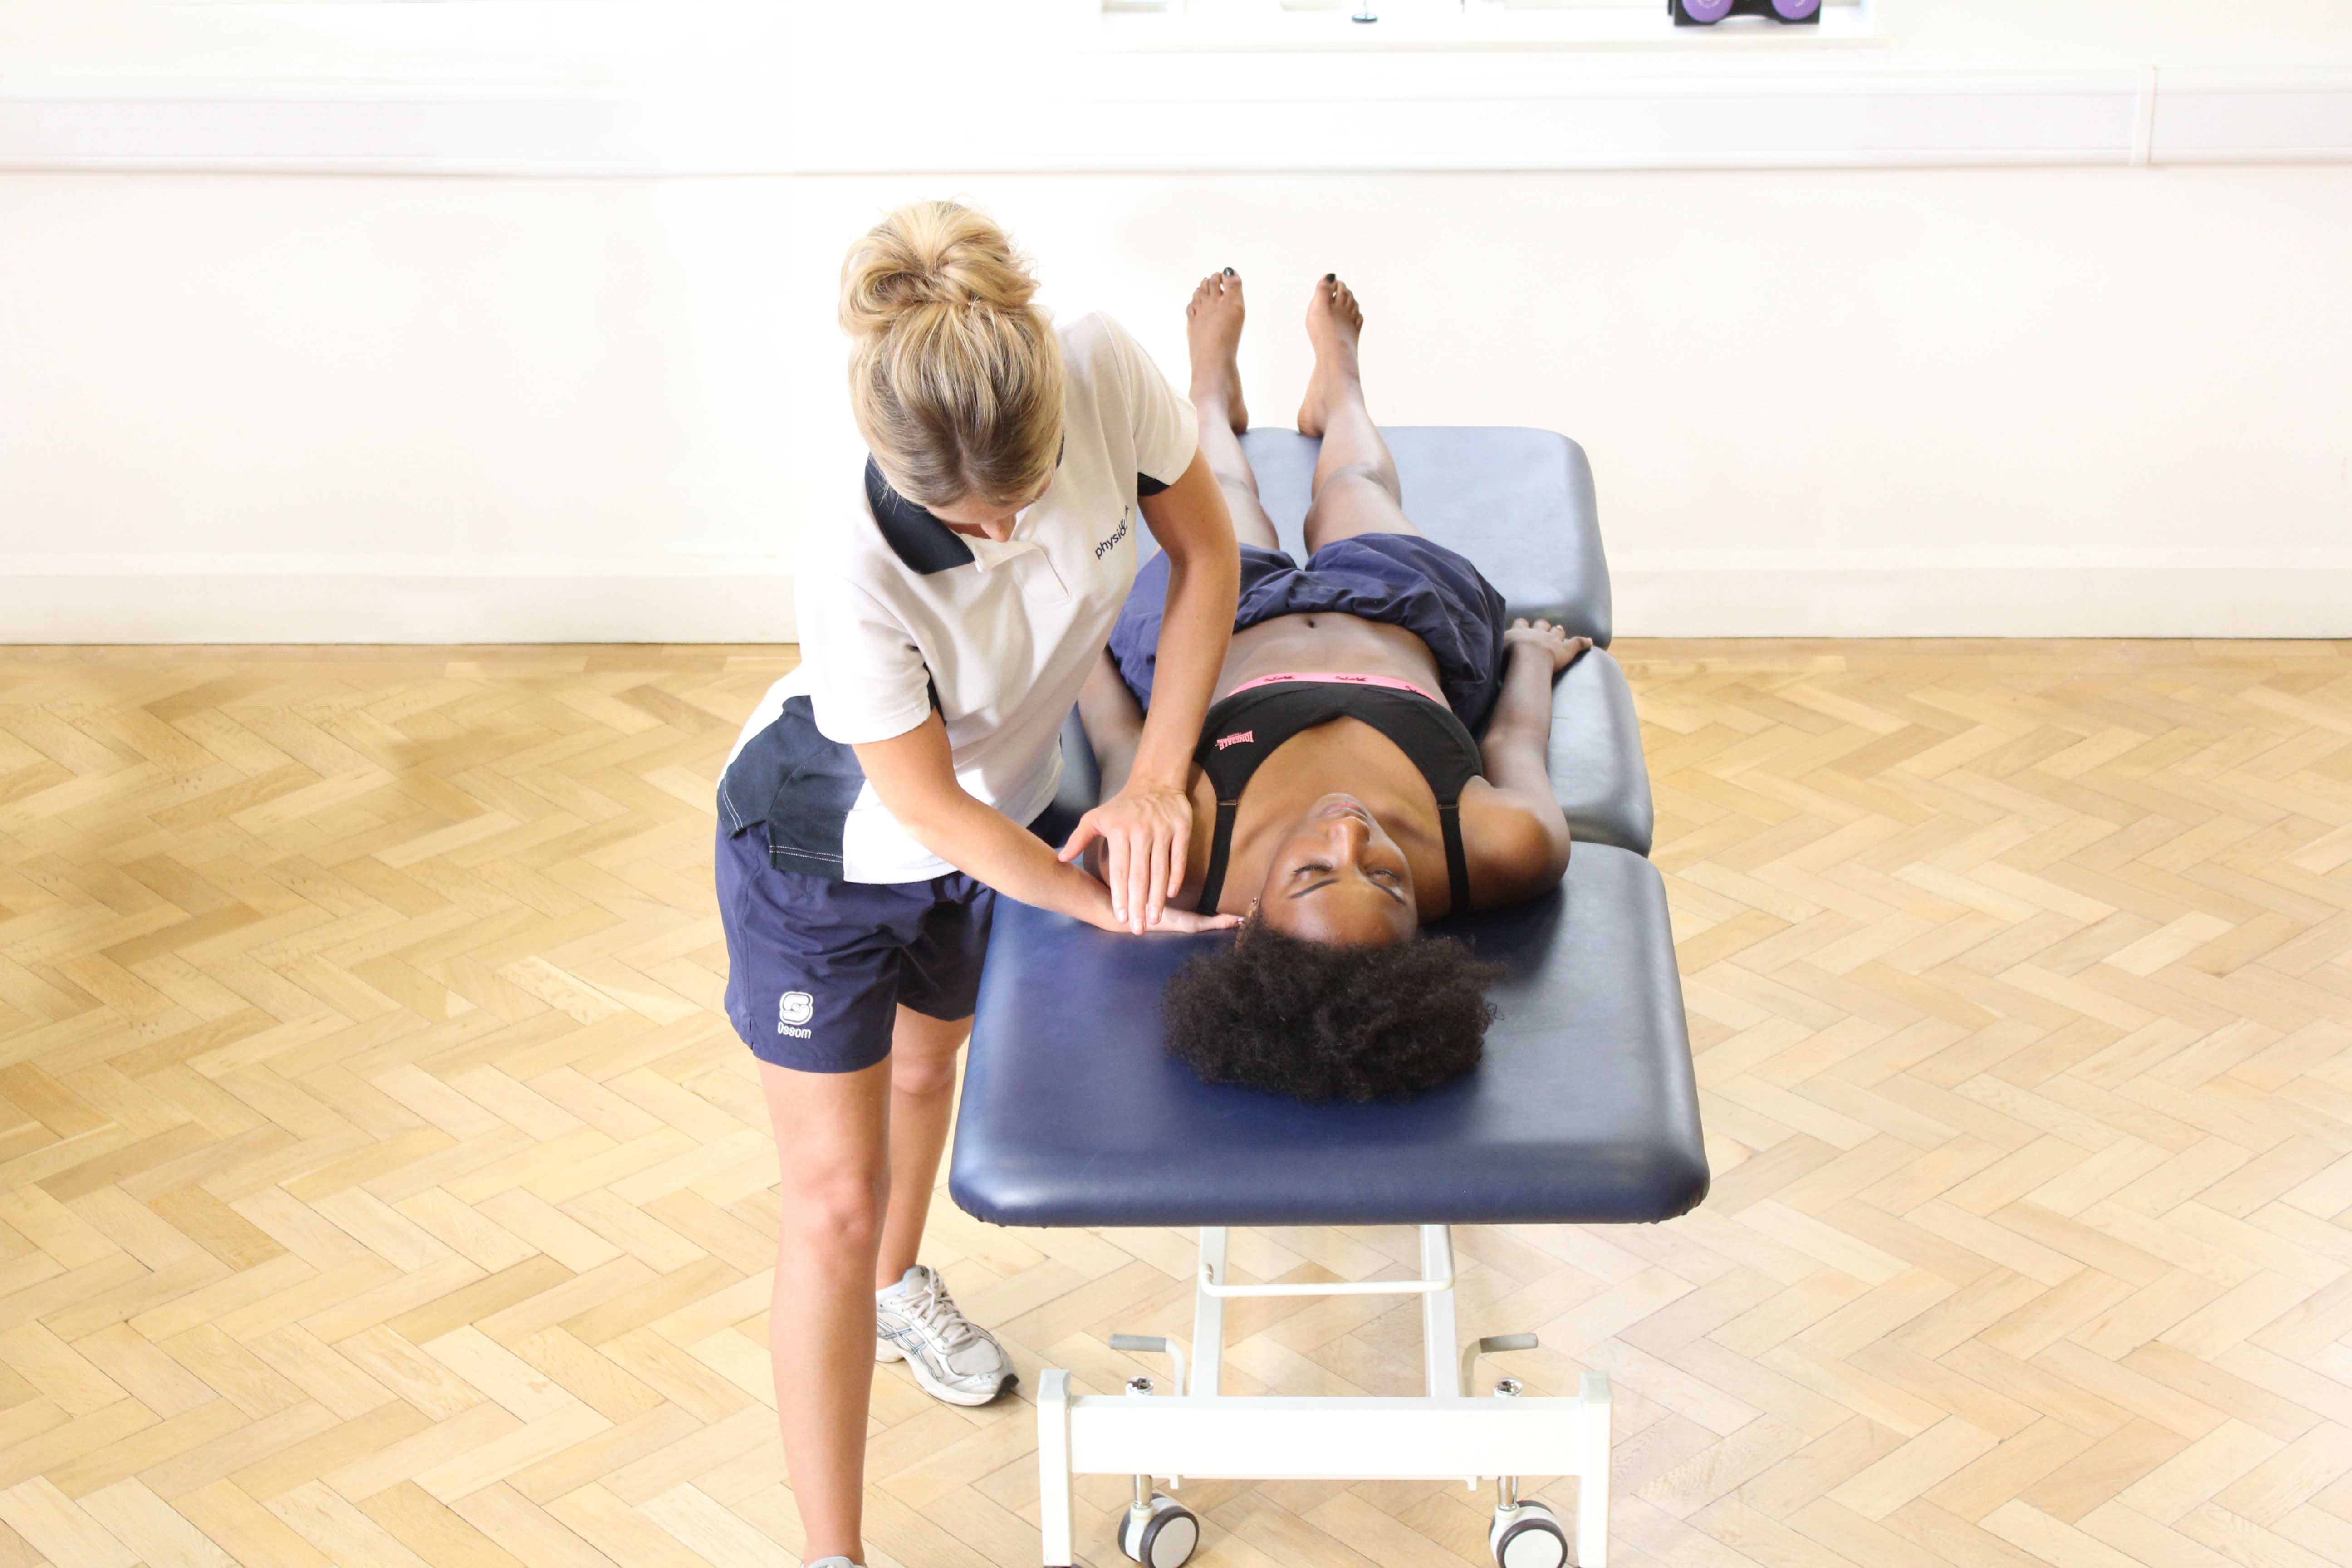 Mobilisations of the lumbar vertebrea by a specilaist physiotherapist